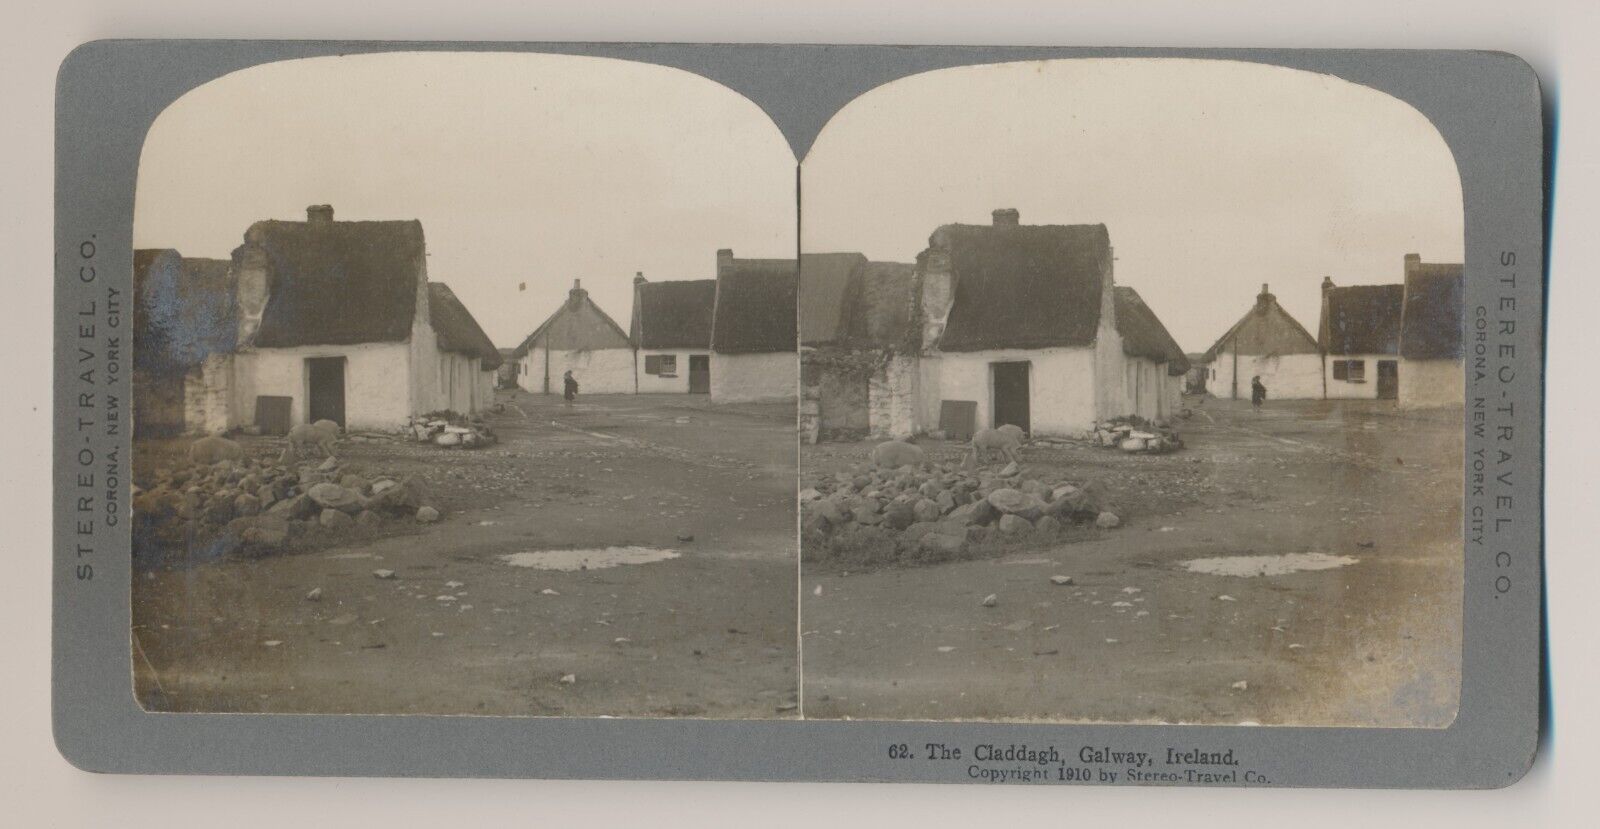 Stereoview Ireland #62 The Claddagh, Galway Village with Pigs Stereo-Travel Co